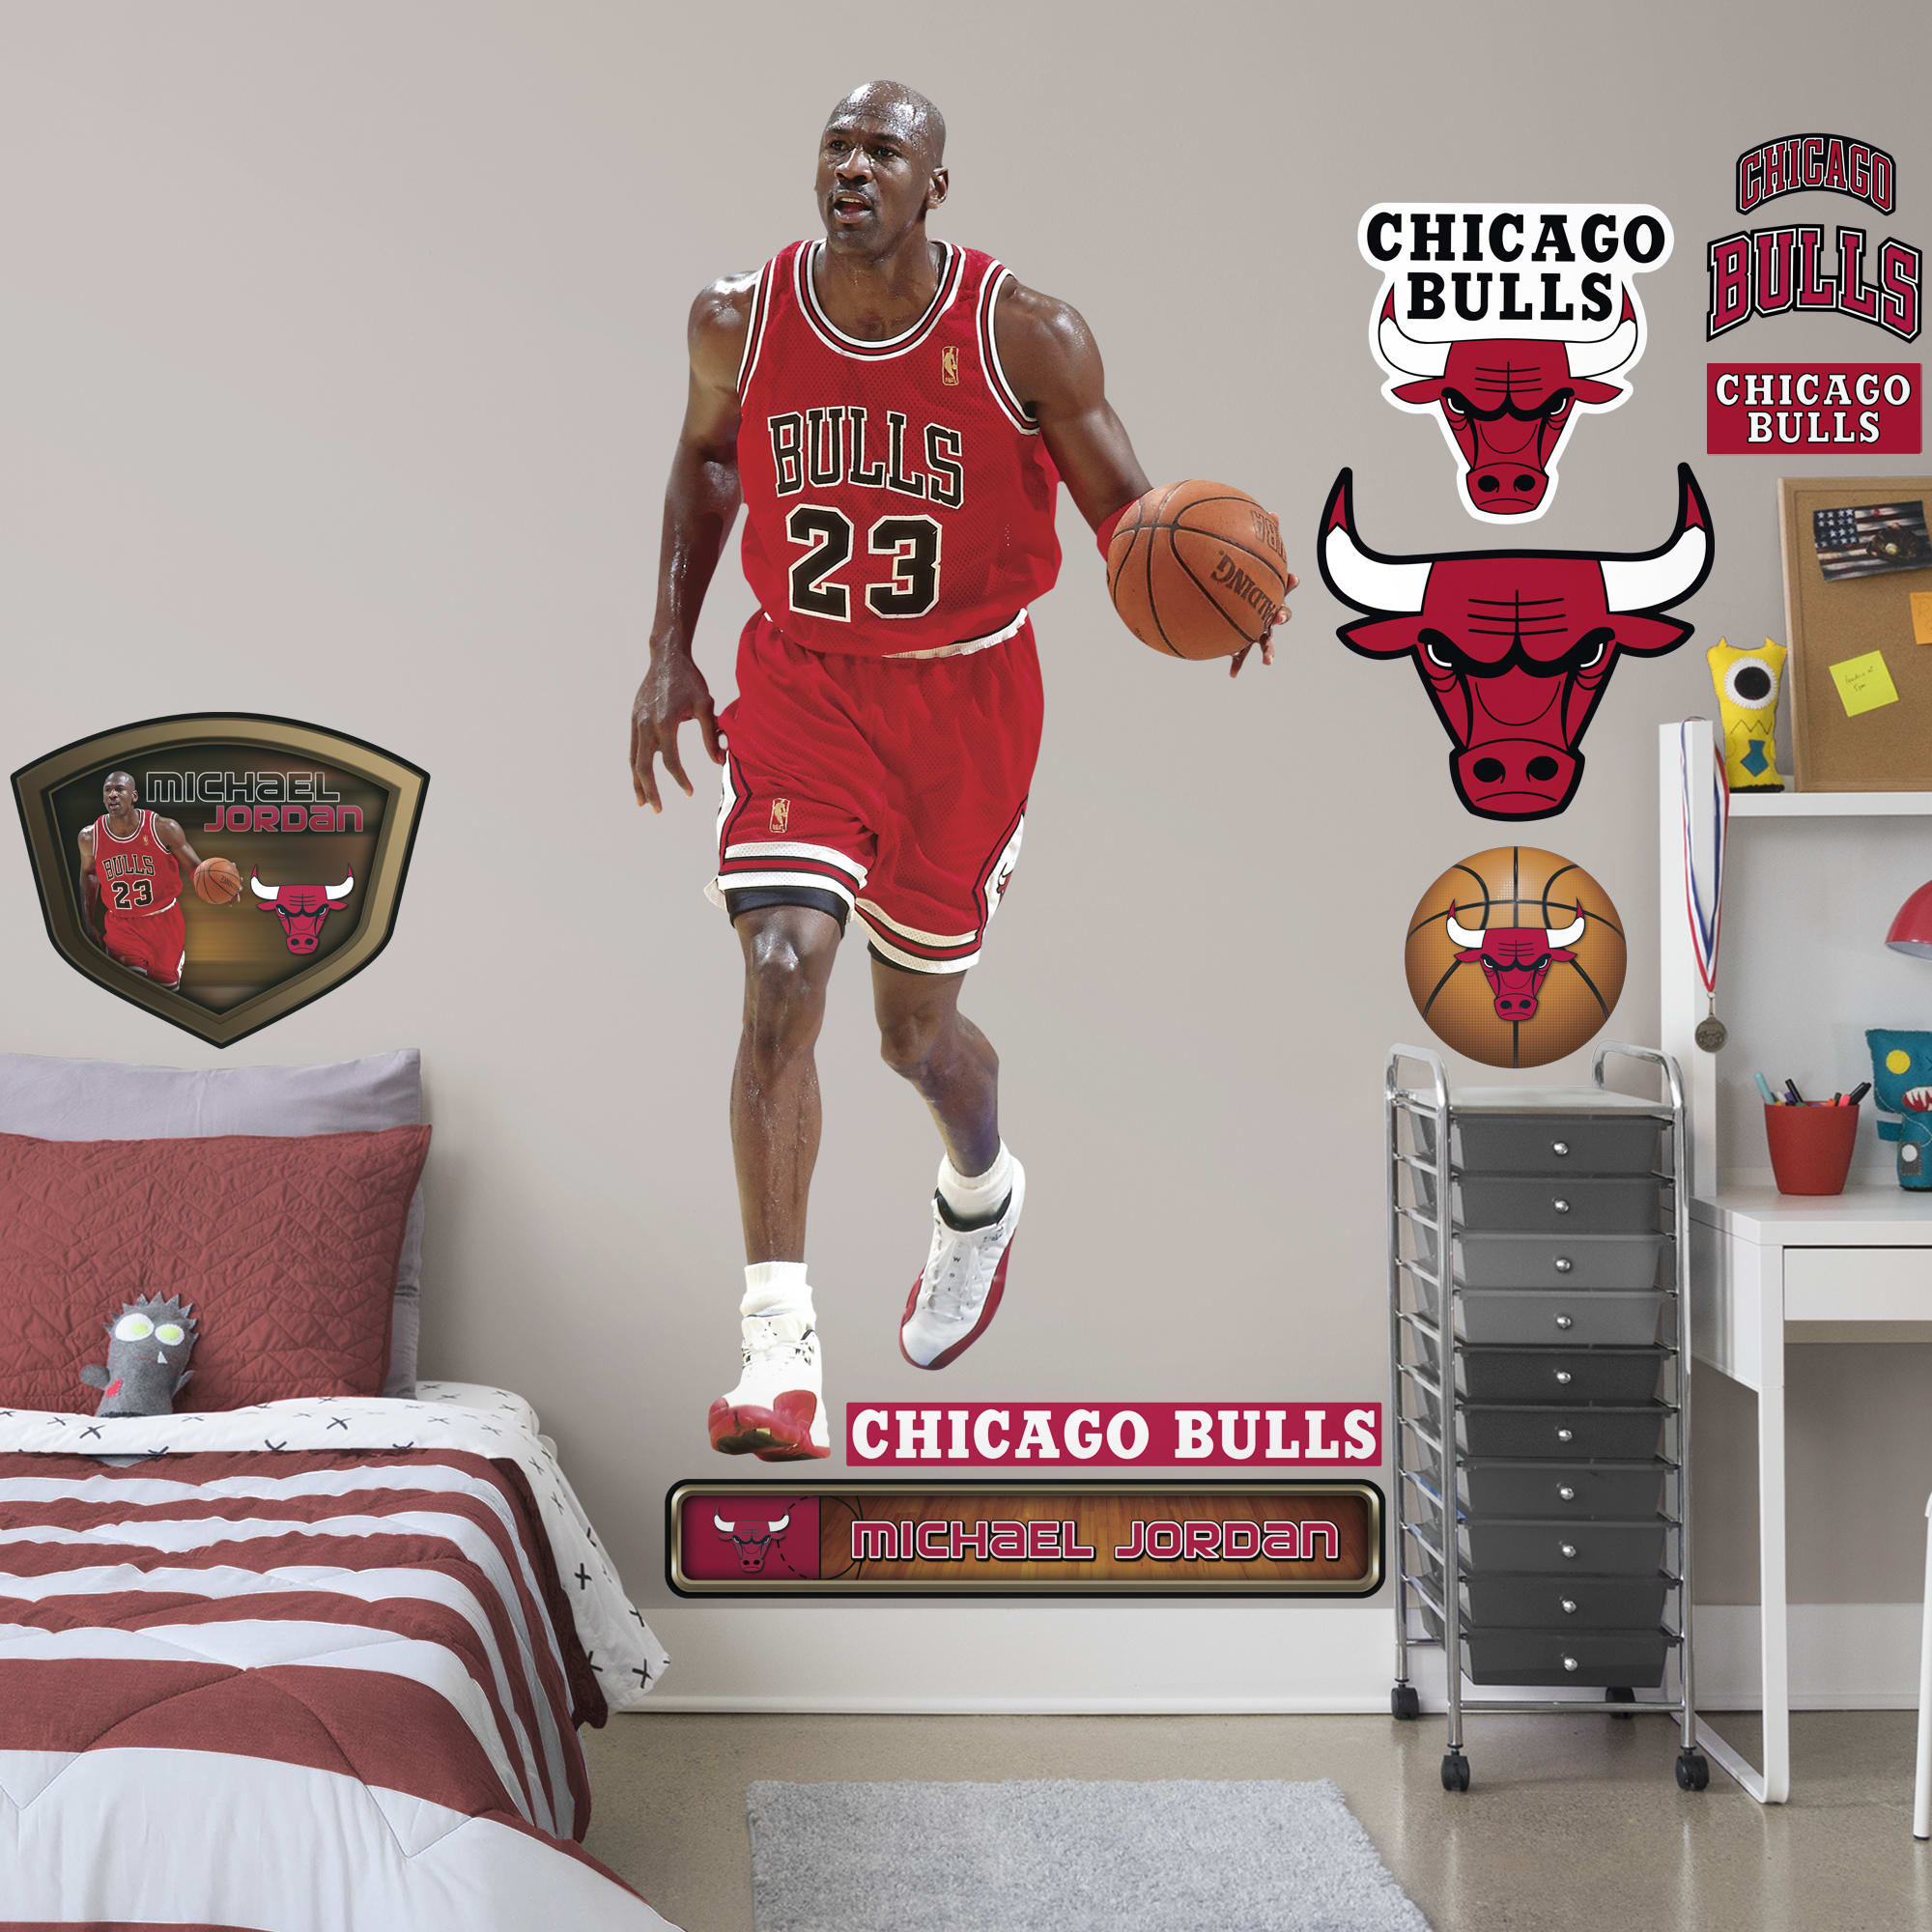 Michael Jordan for Chicago Bulls - Officially Licensed NBA Removable Wall Decal Life-Size Athlete + 12 Decals (37"W x 78"H) by F